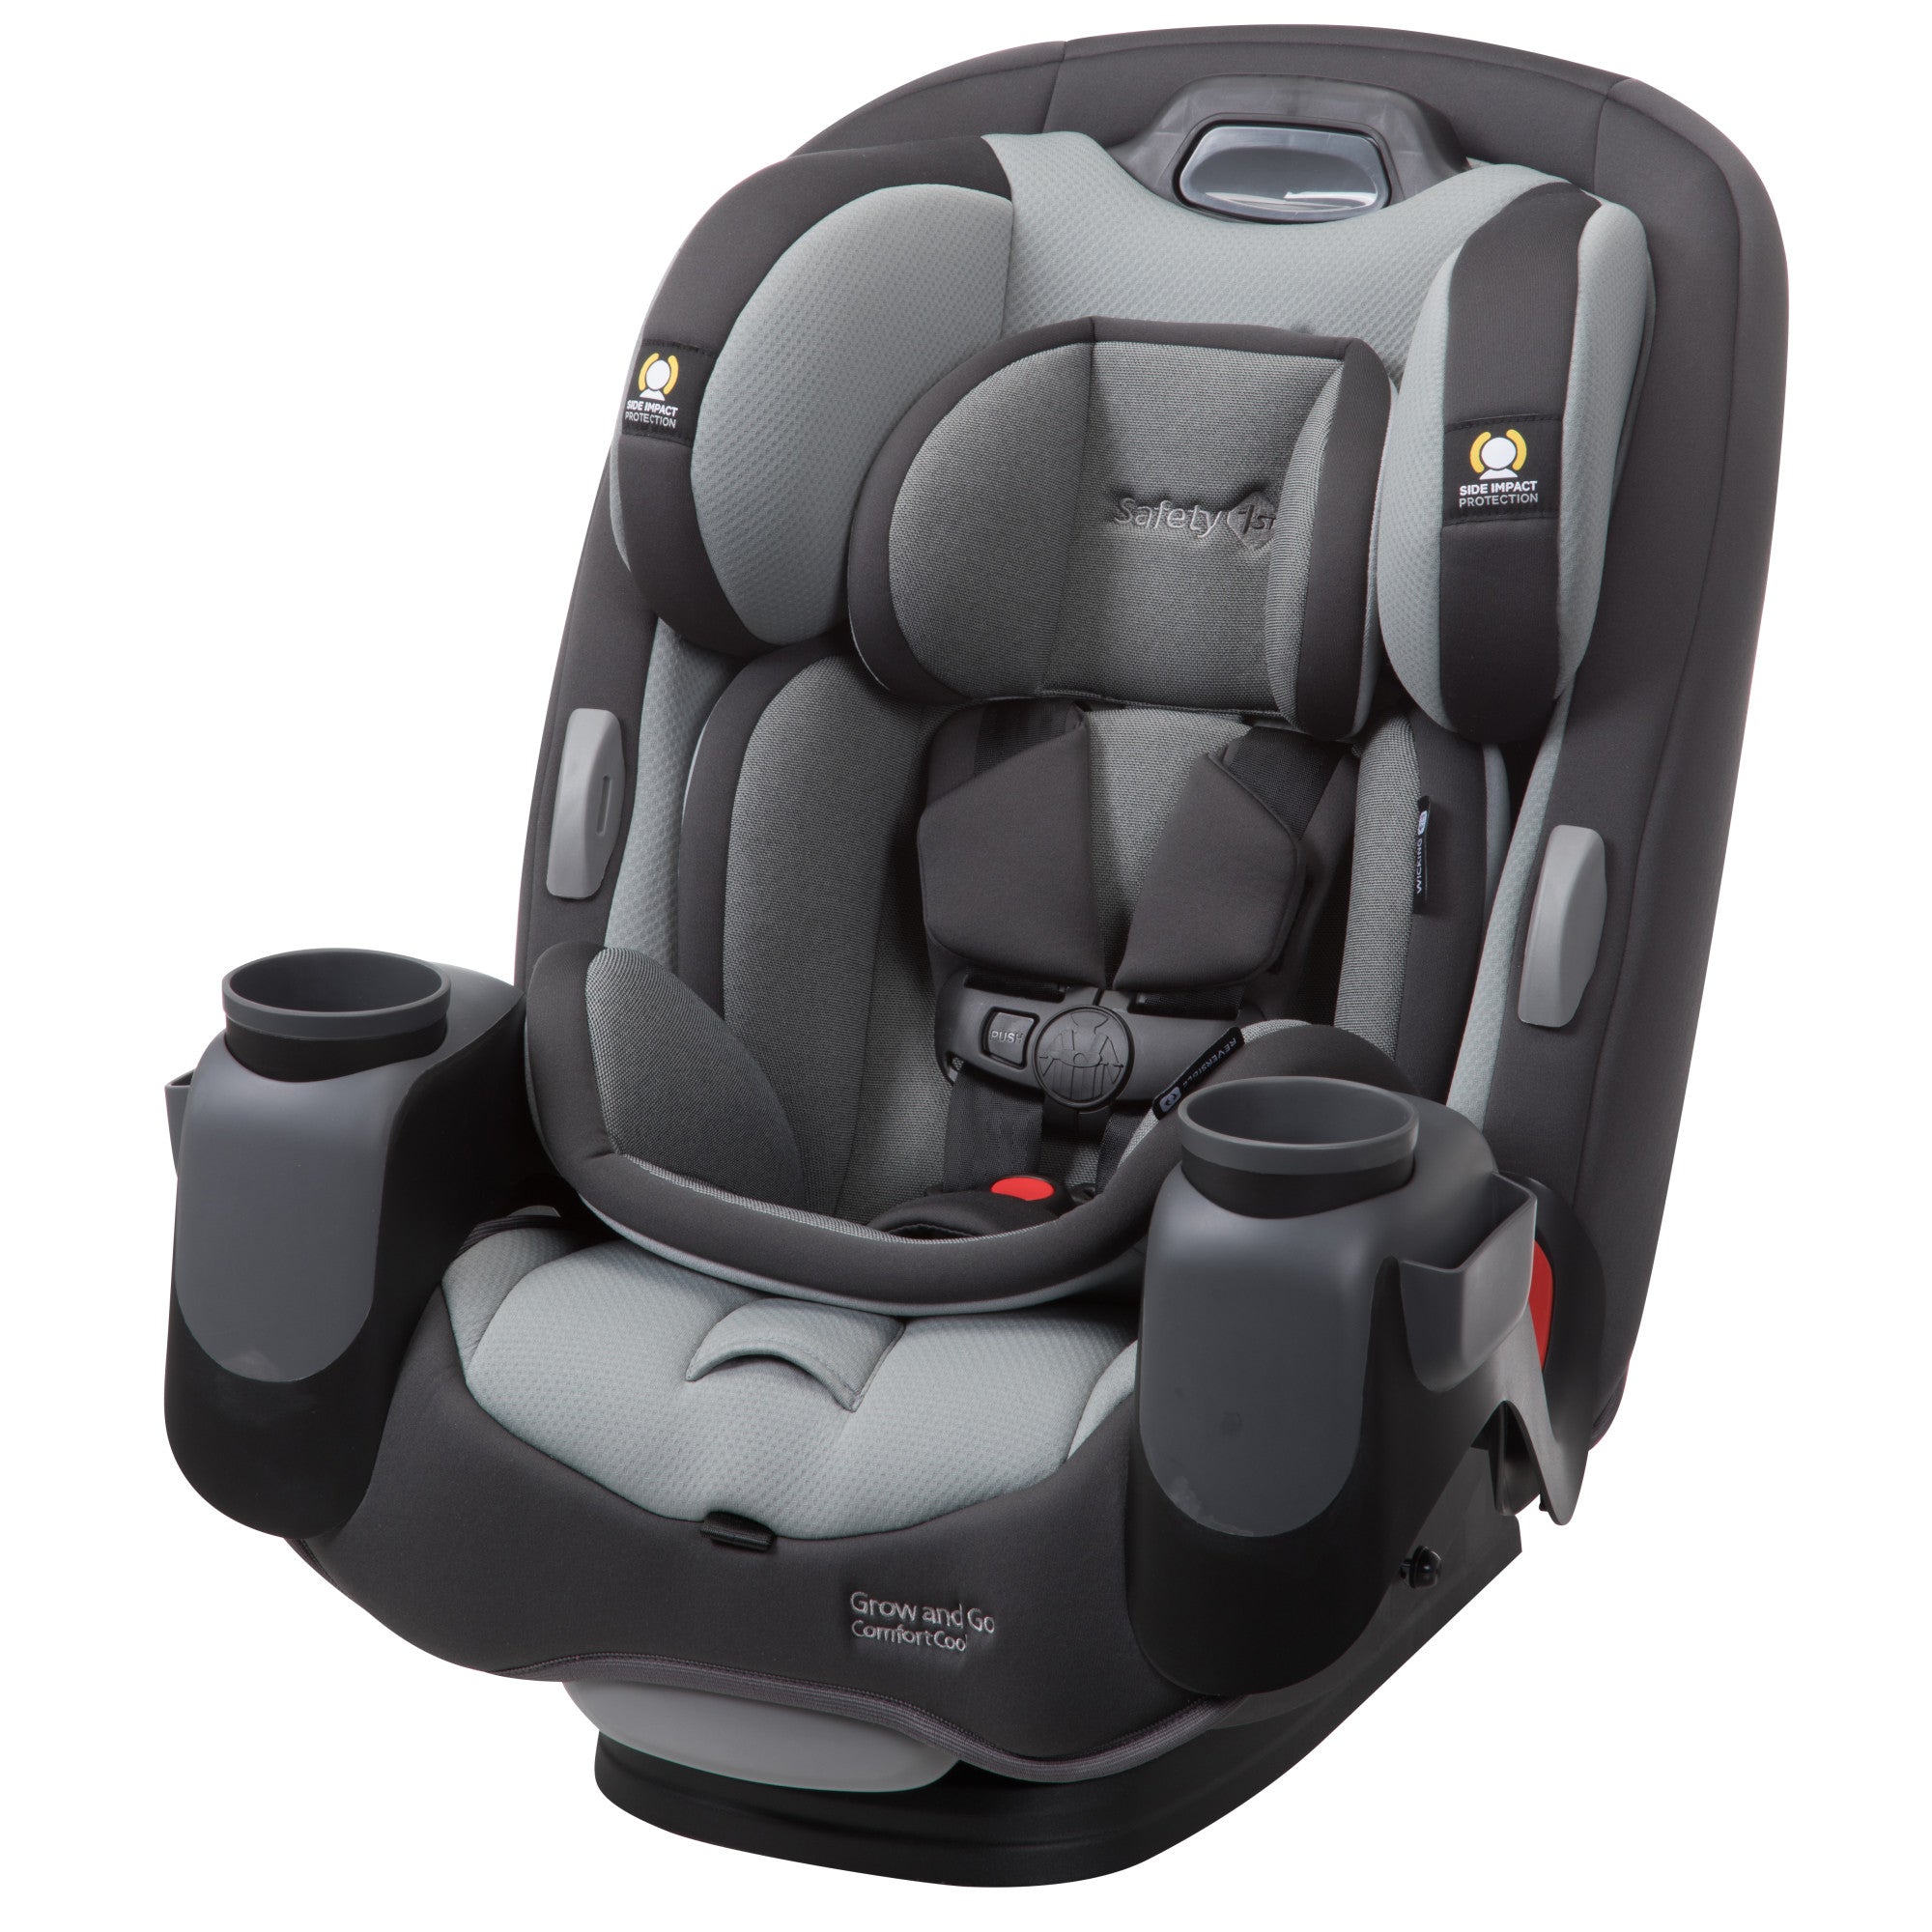 Grow and Go™ Comfort Cool All-in-One Convertible Car Seat - Pebble Path